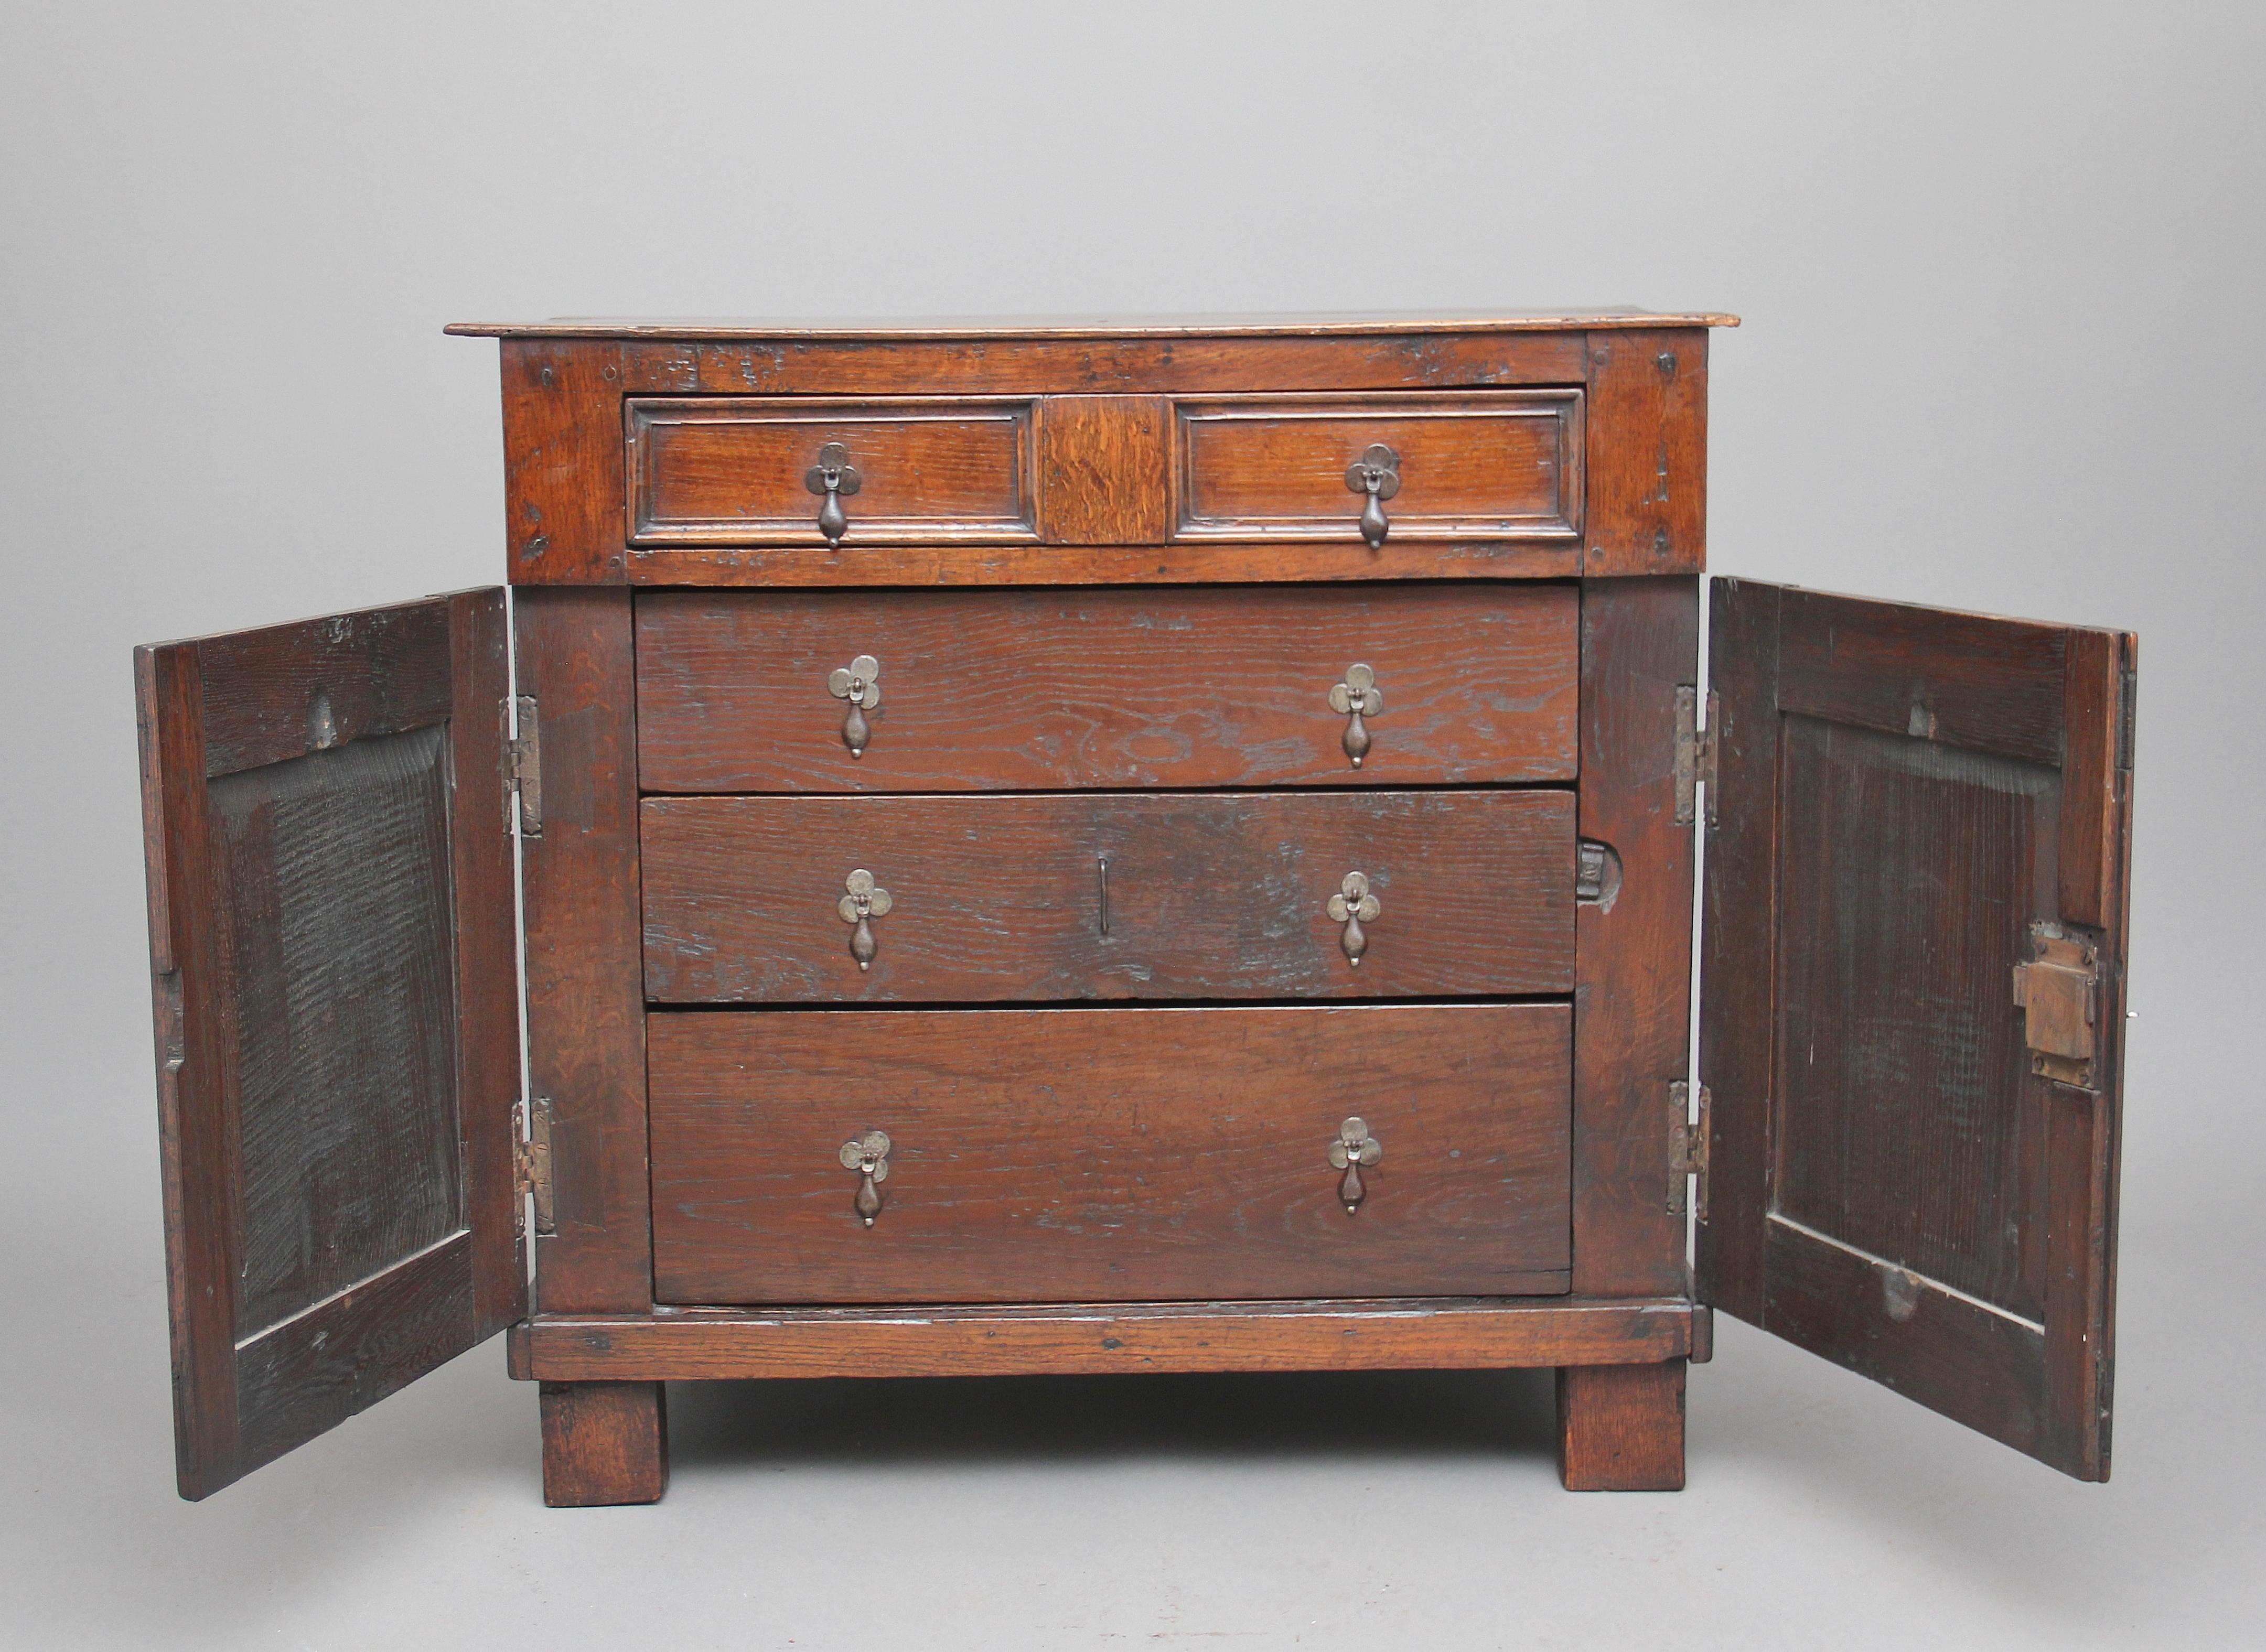 Early 18th century oak cupboard / enclosed chest of drawers of good proportions, the lovely figured top above a frieze drawer with brass drop handles, the drawer fronts having a nice moulded edge, two panelled cupboard doors below opening to reveal